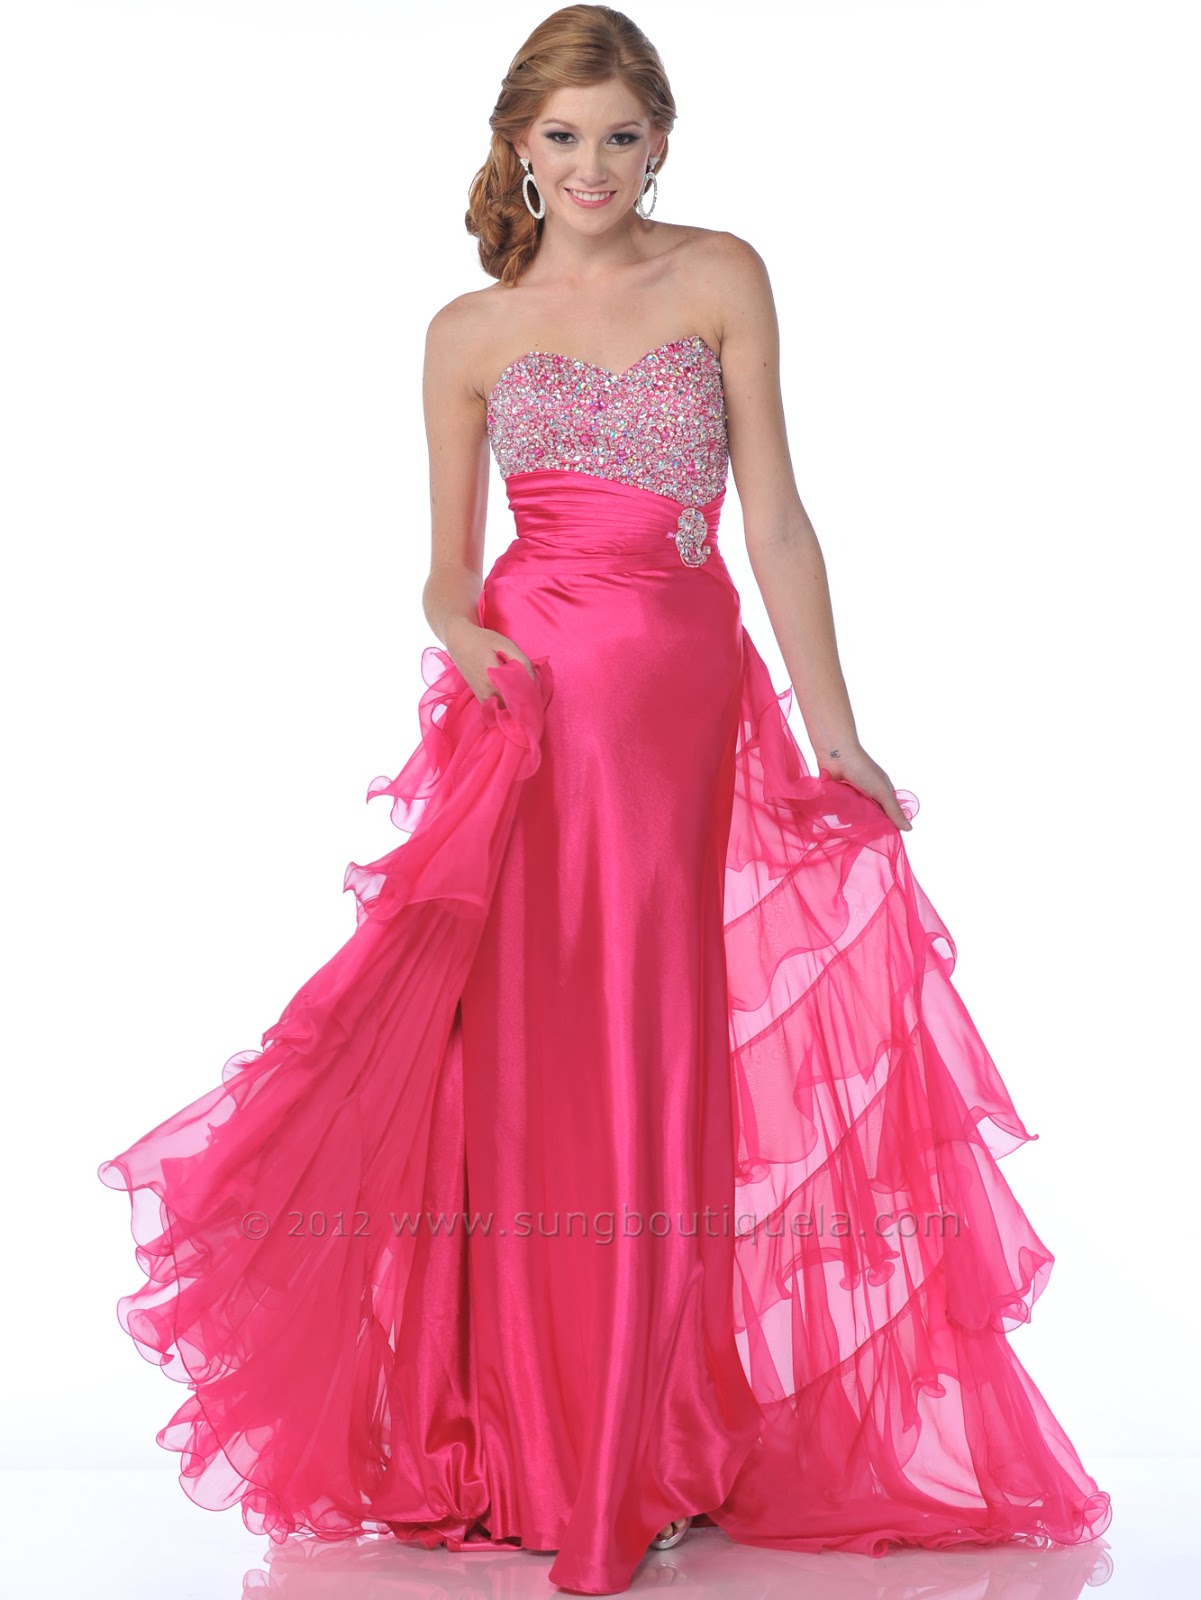 strapless wedding dresses ball gown with sparkles regardless of what any style oracles think the prom dress of today can 